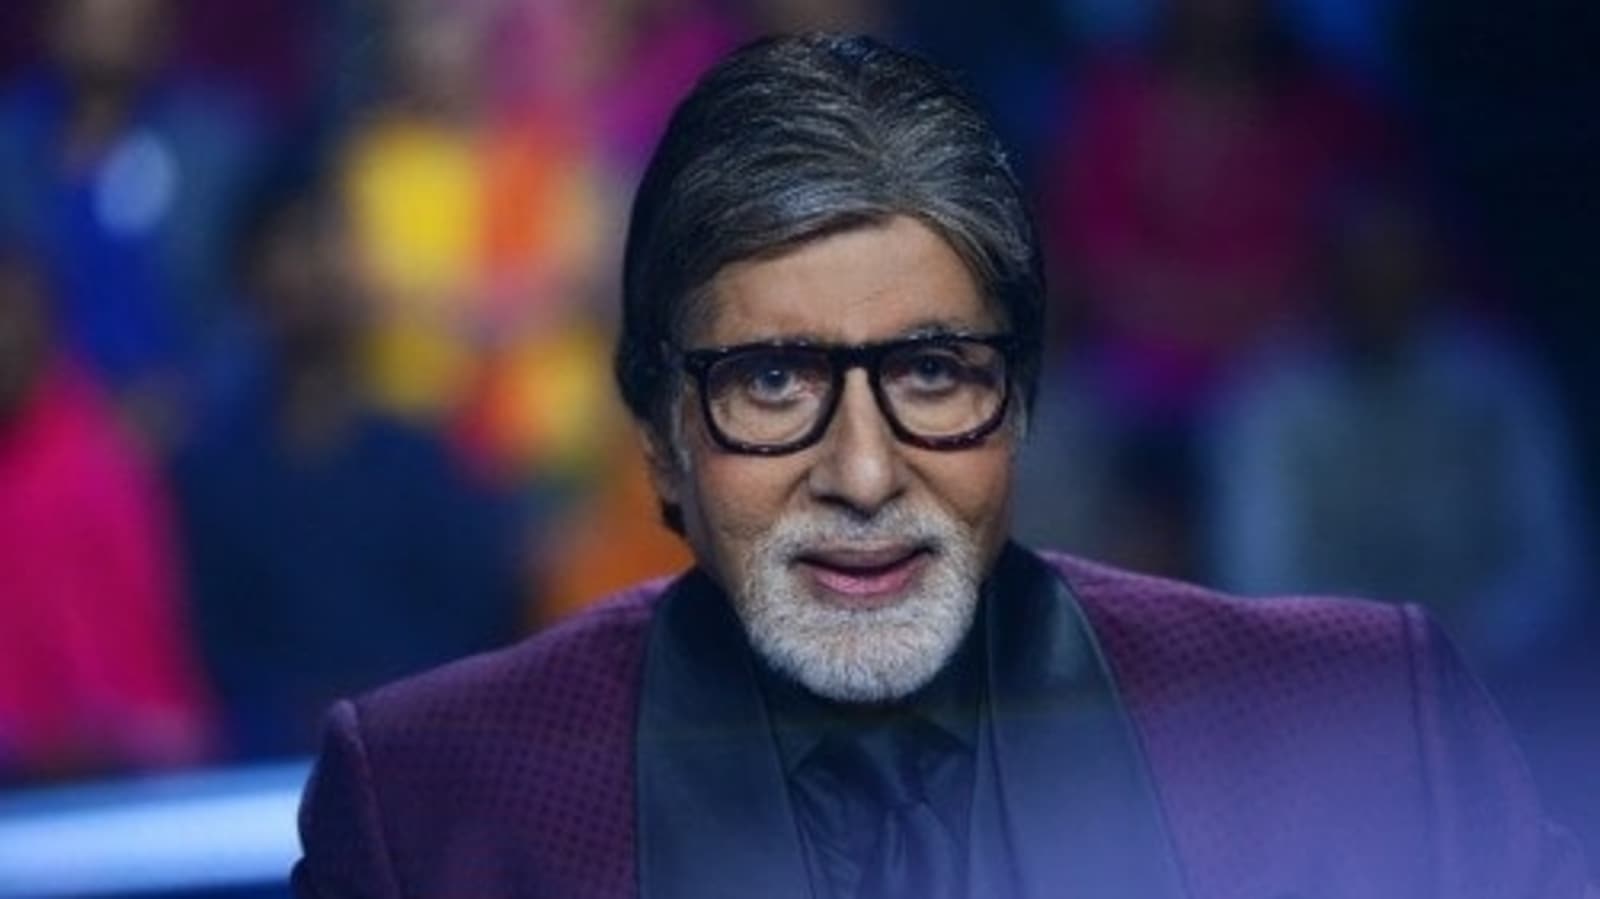 Amitabh Bachchan says days at Kaun Banega Crorepati 14 ‘are coming to an end’, talks about withdrawal sentiments